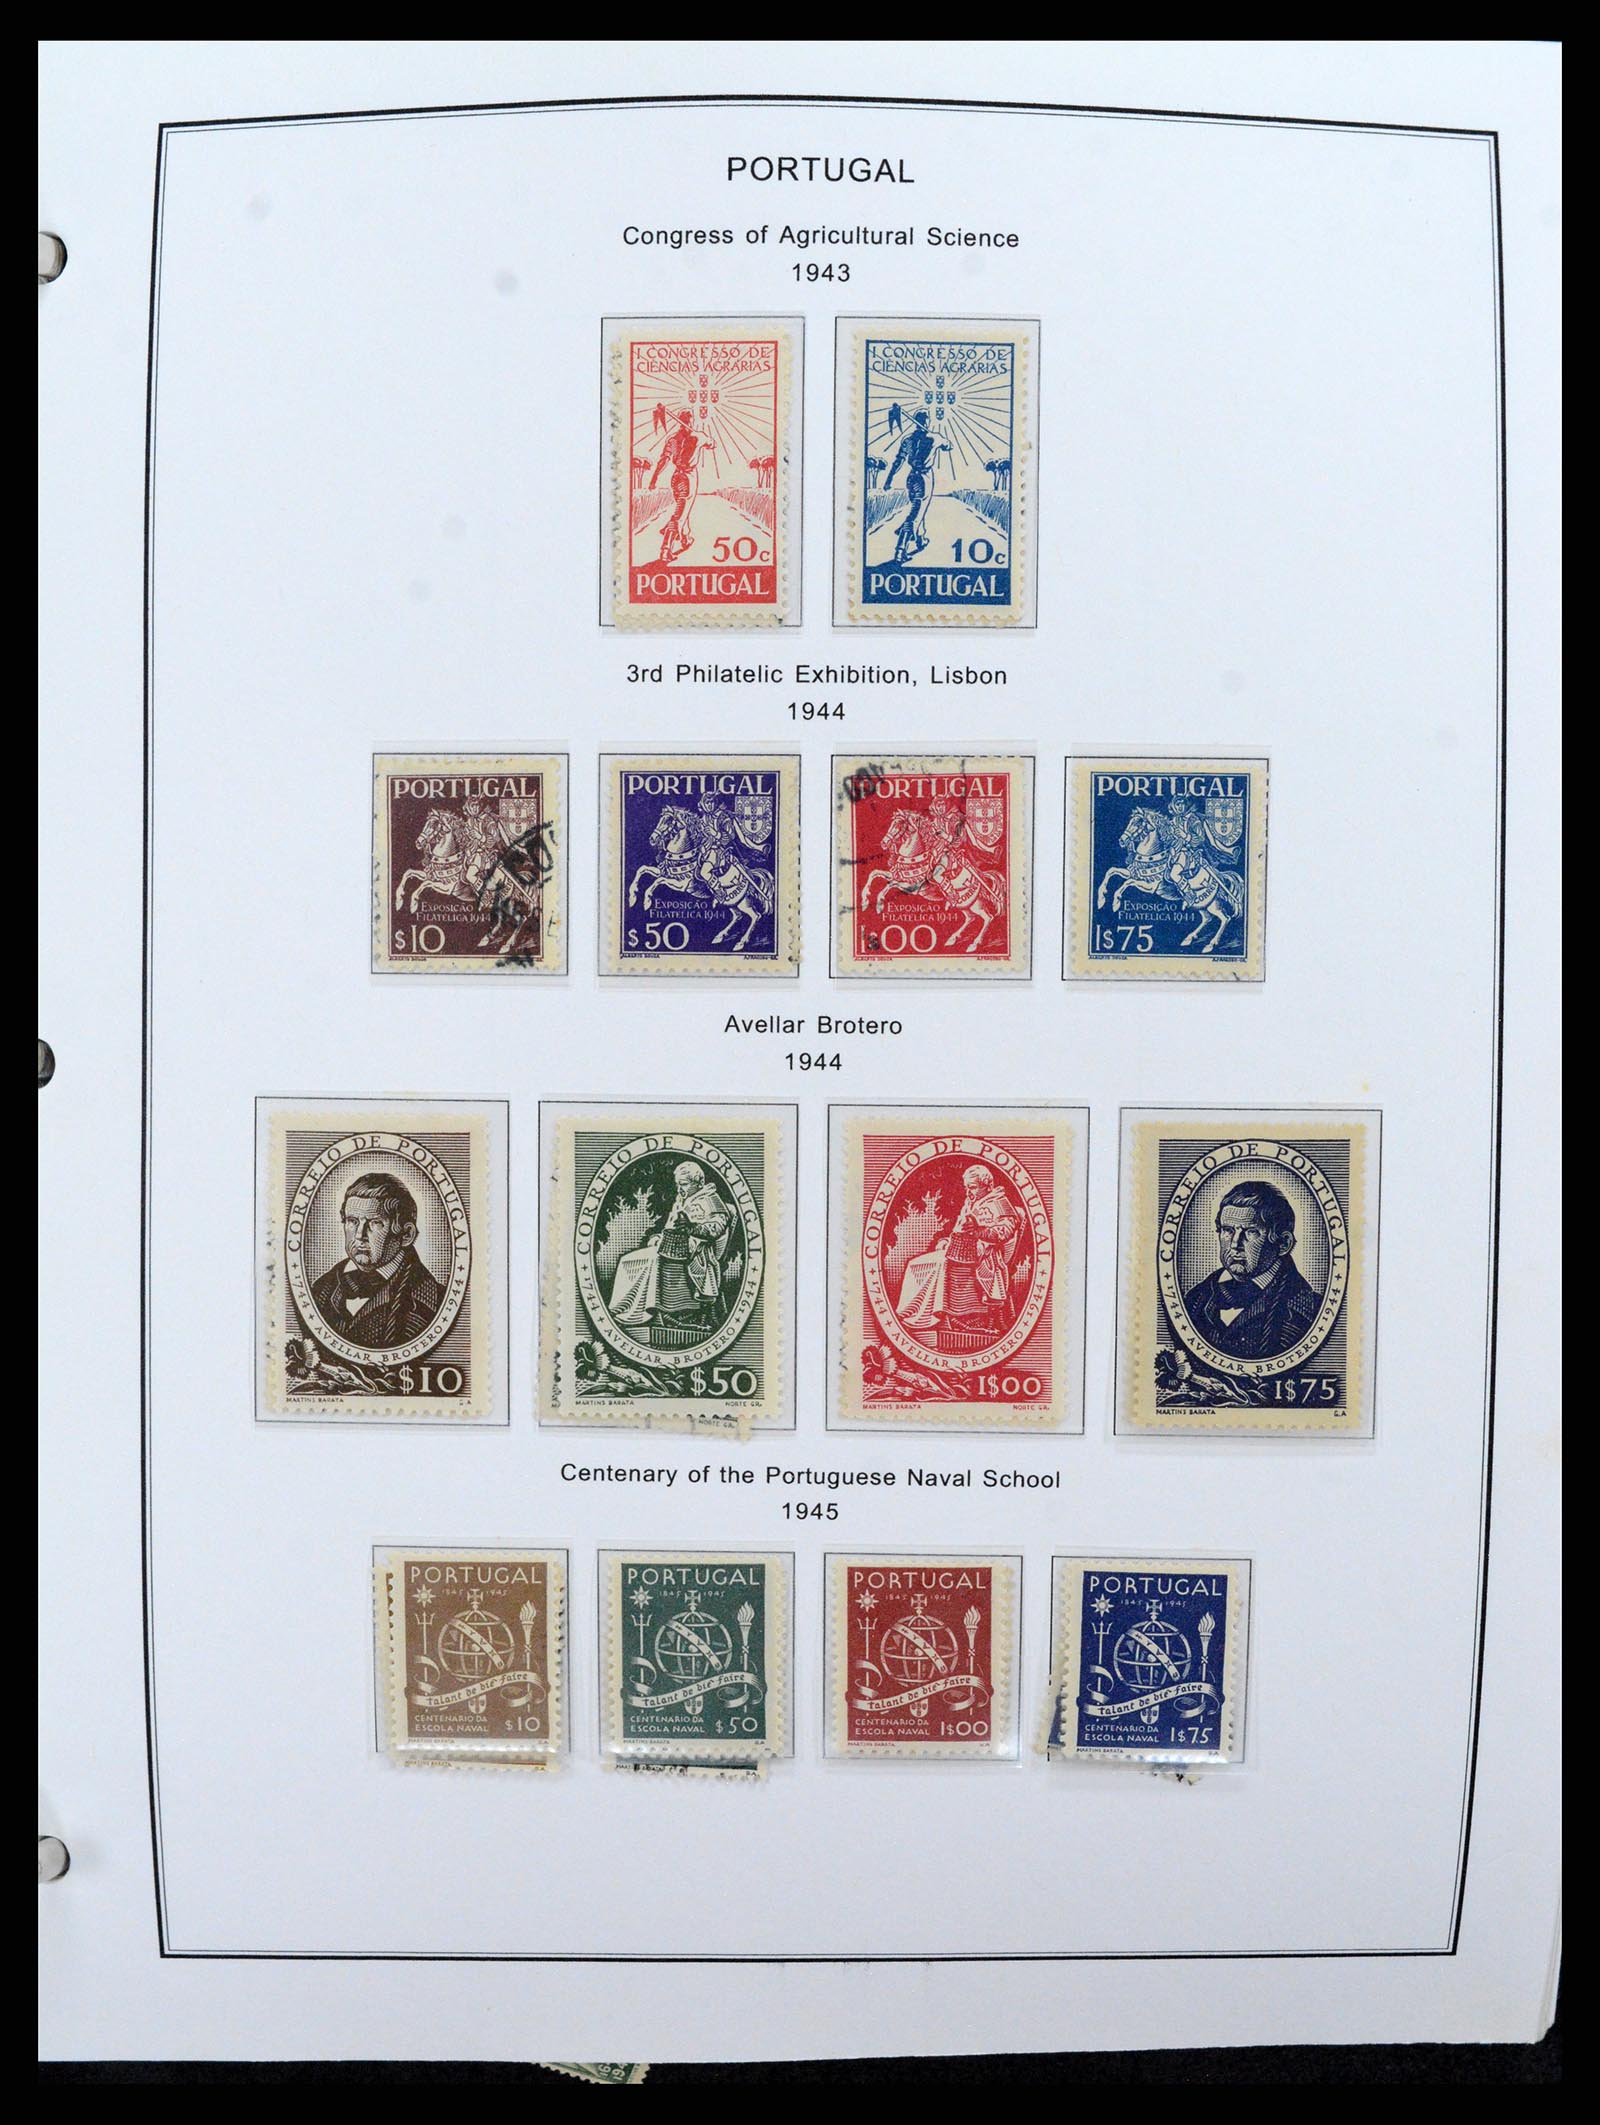 37767 040 - Stamp collection 37767 Portugal and colonies 1853-1990.